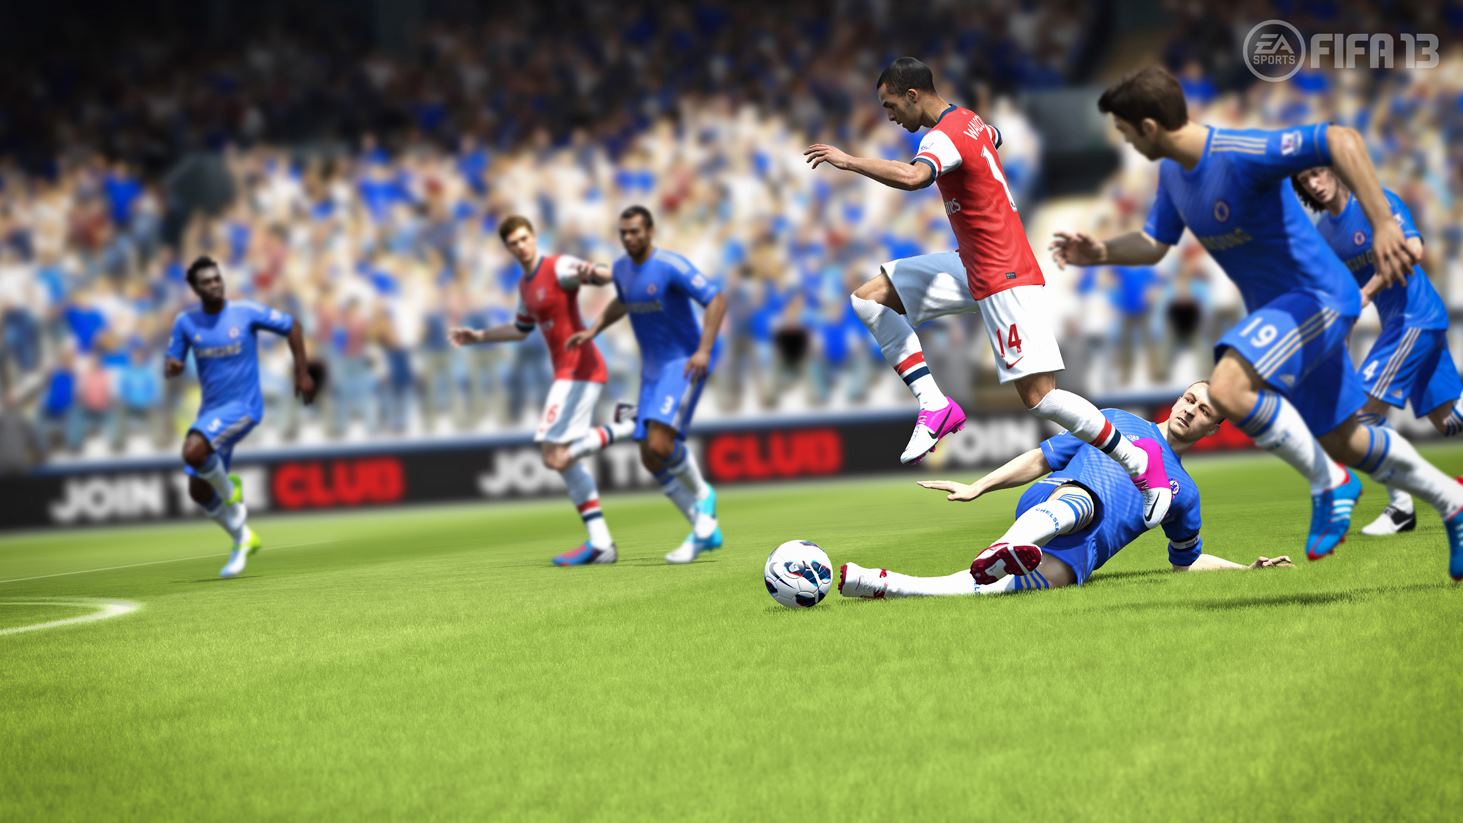 FIFA 13 Demo launches on September 11th